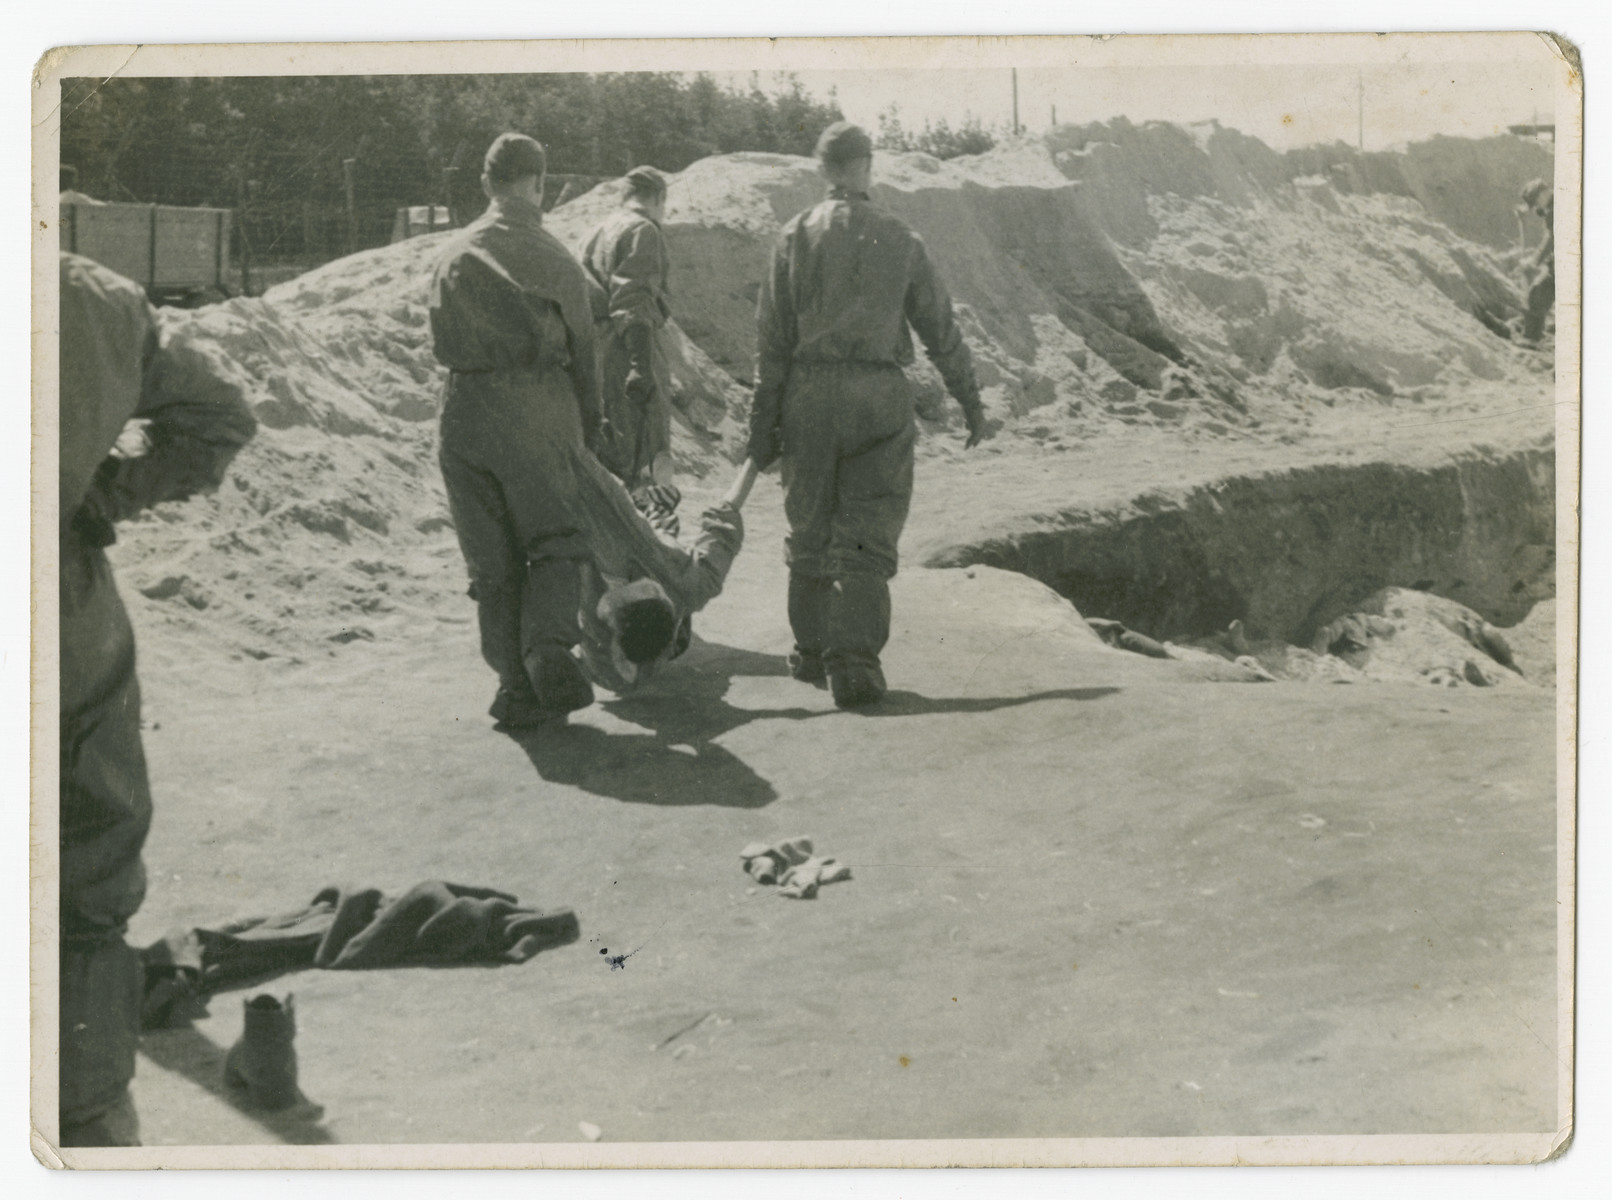 Soldiers bury victims in a large pit in the Bergen-Belsen concentration camp following liberation.

The original caption reads: "From truck to pit at Belsen."